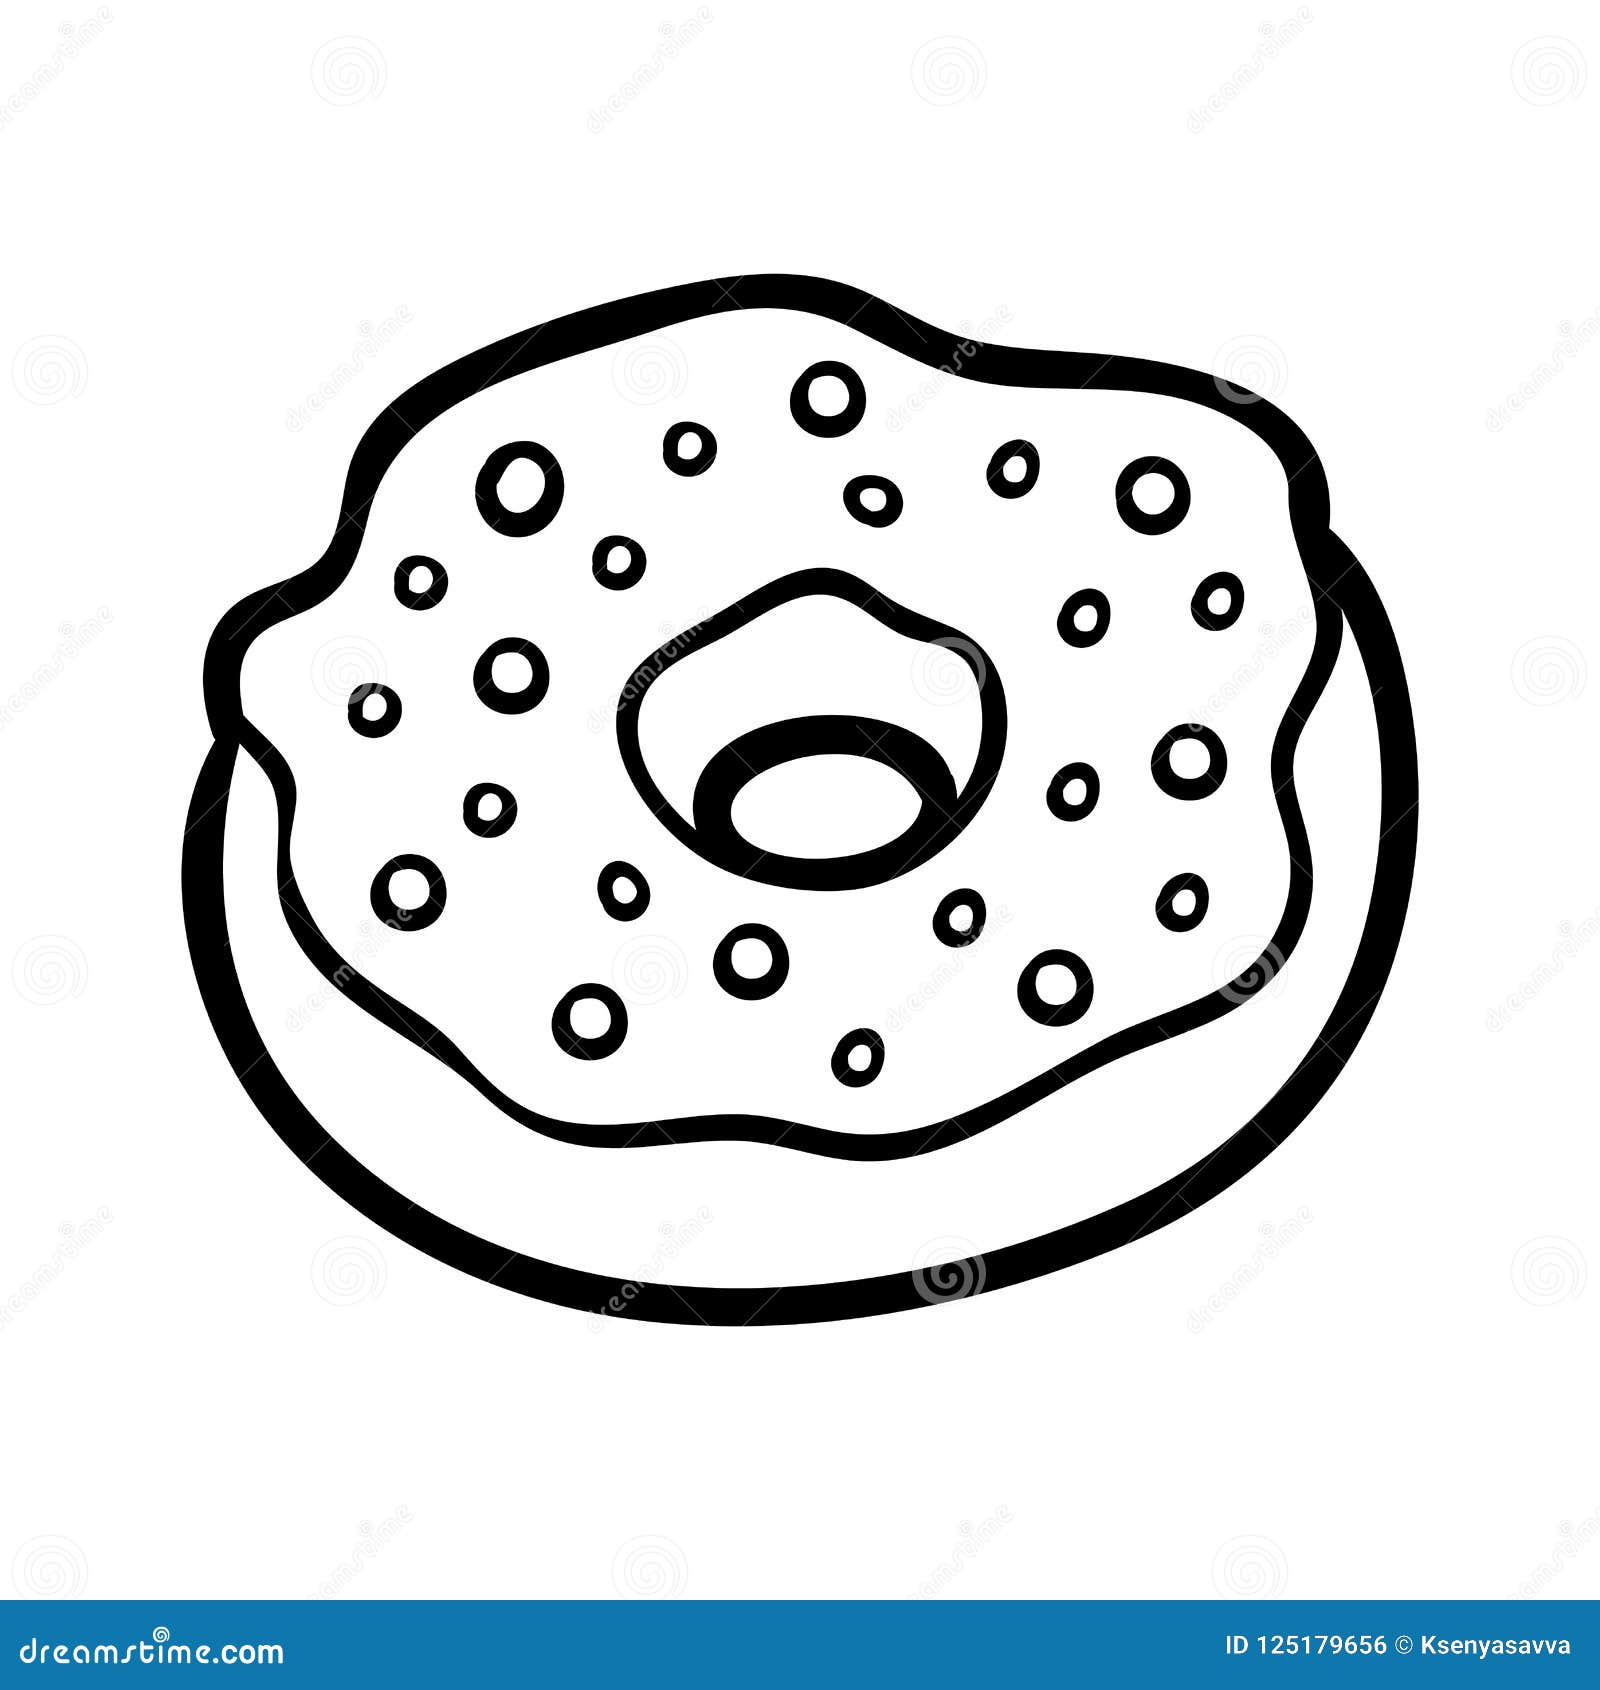 Coloring book, Donut stock vector. Illustration of delicious - 125179656